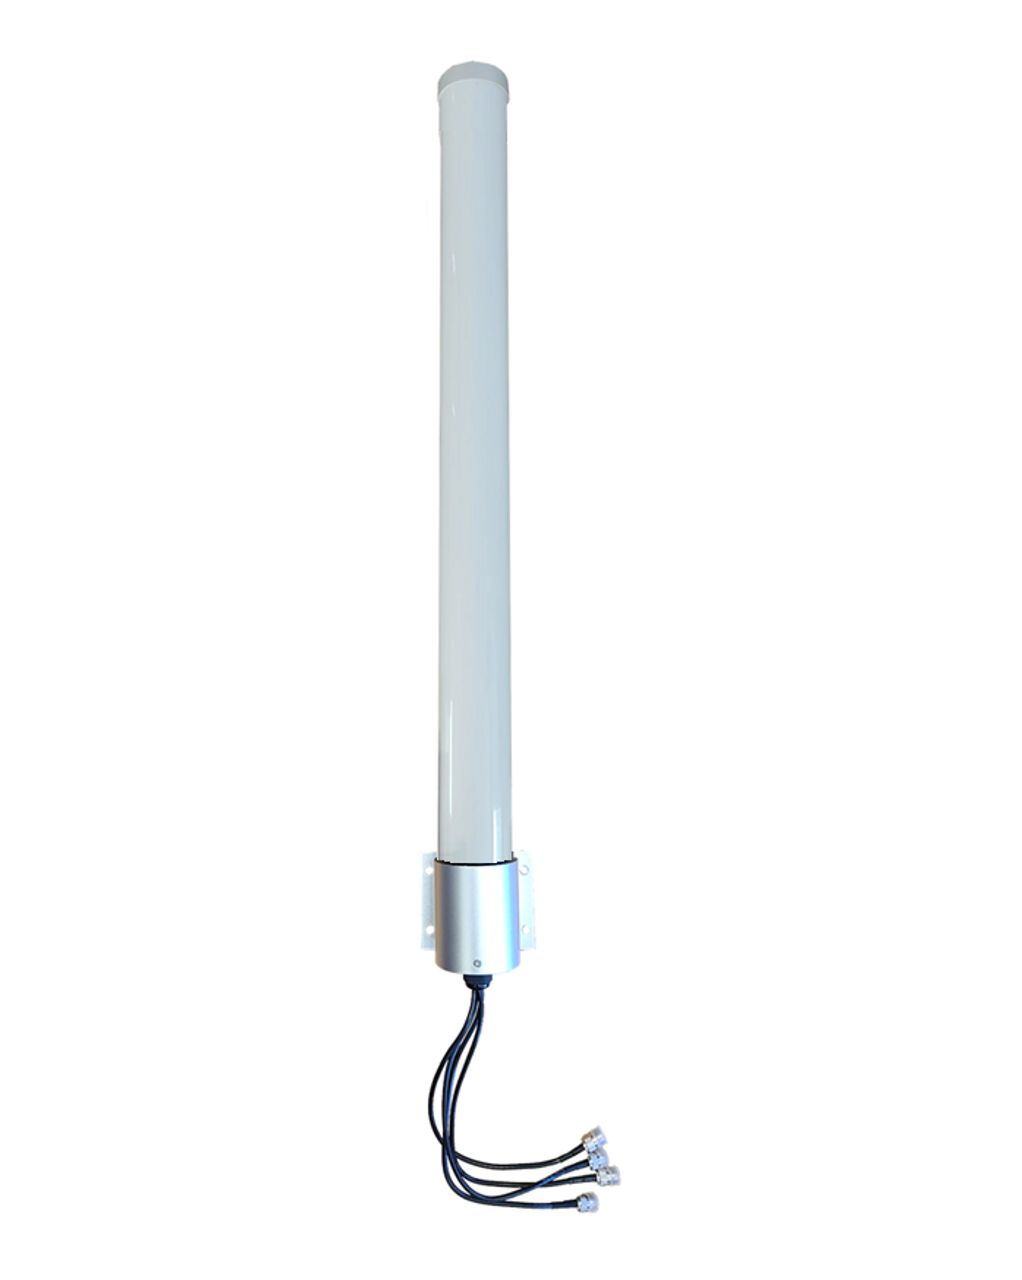 Cradlepoint IBR900 Antenna - M79 Omni Directional MIMO 4 x Cellular 4G LTE CBRS 5G NR M2M IoT Bracket Mount Antenna w/4 x Coax Cables